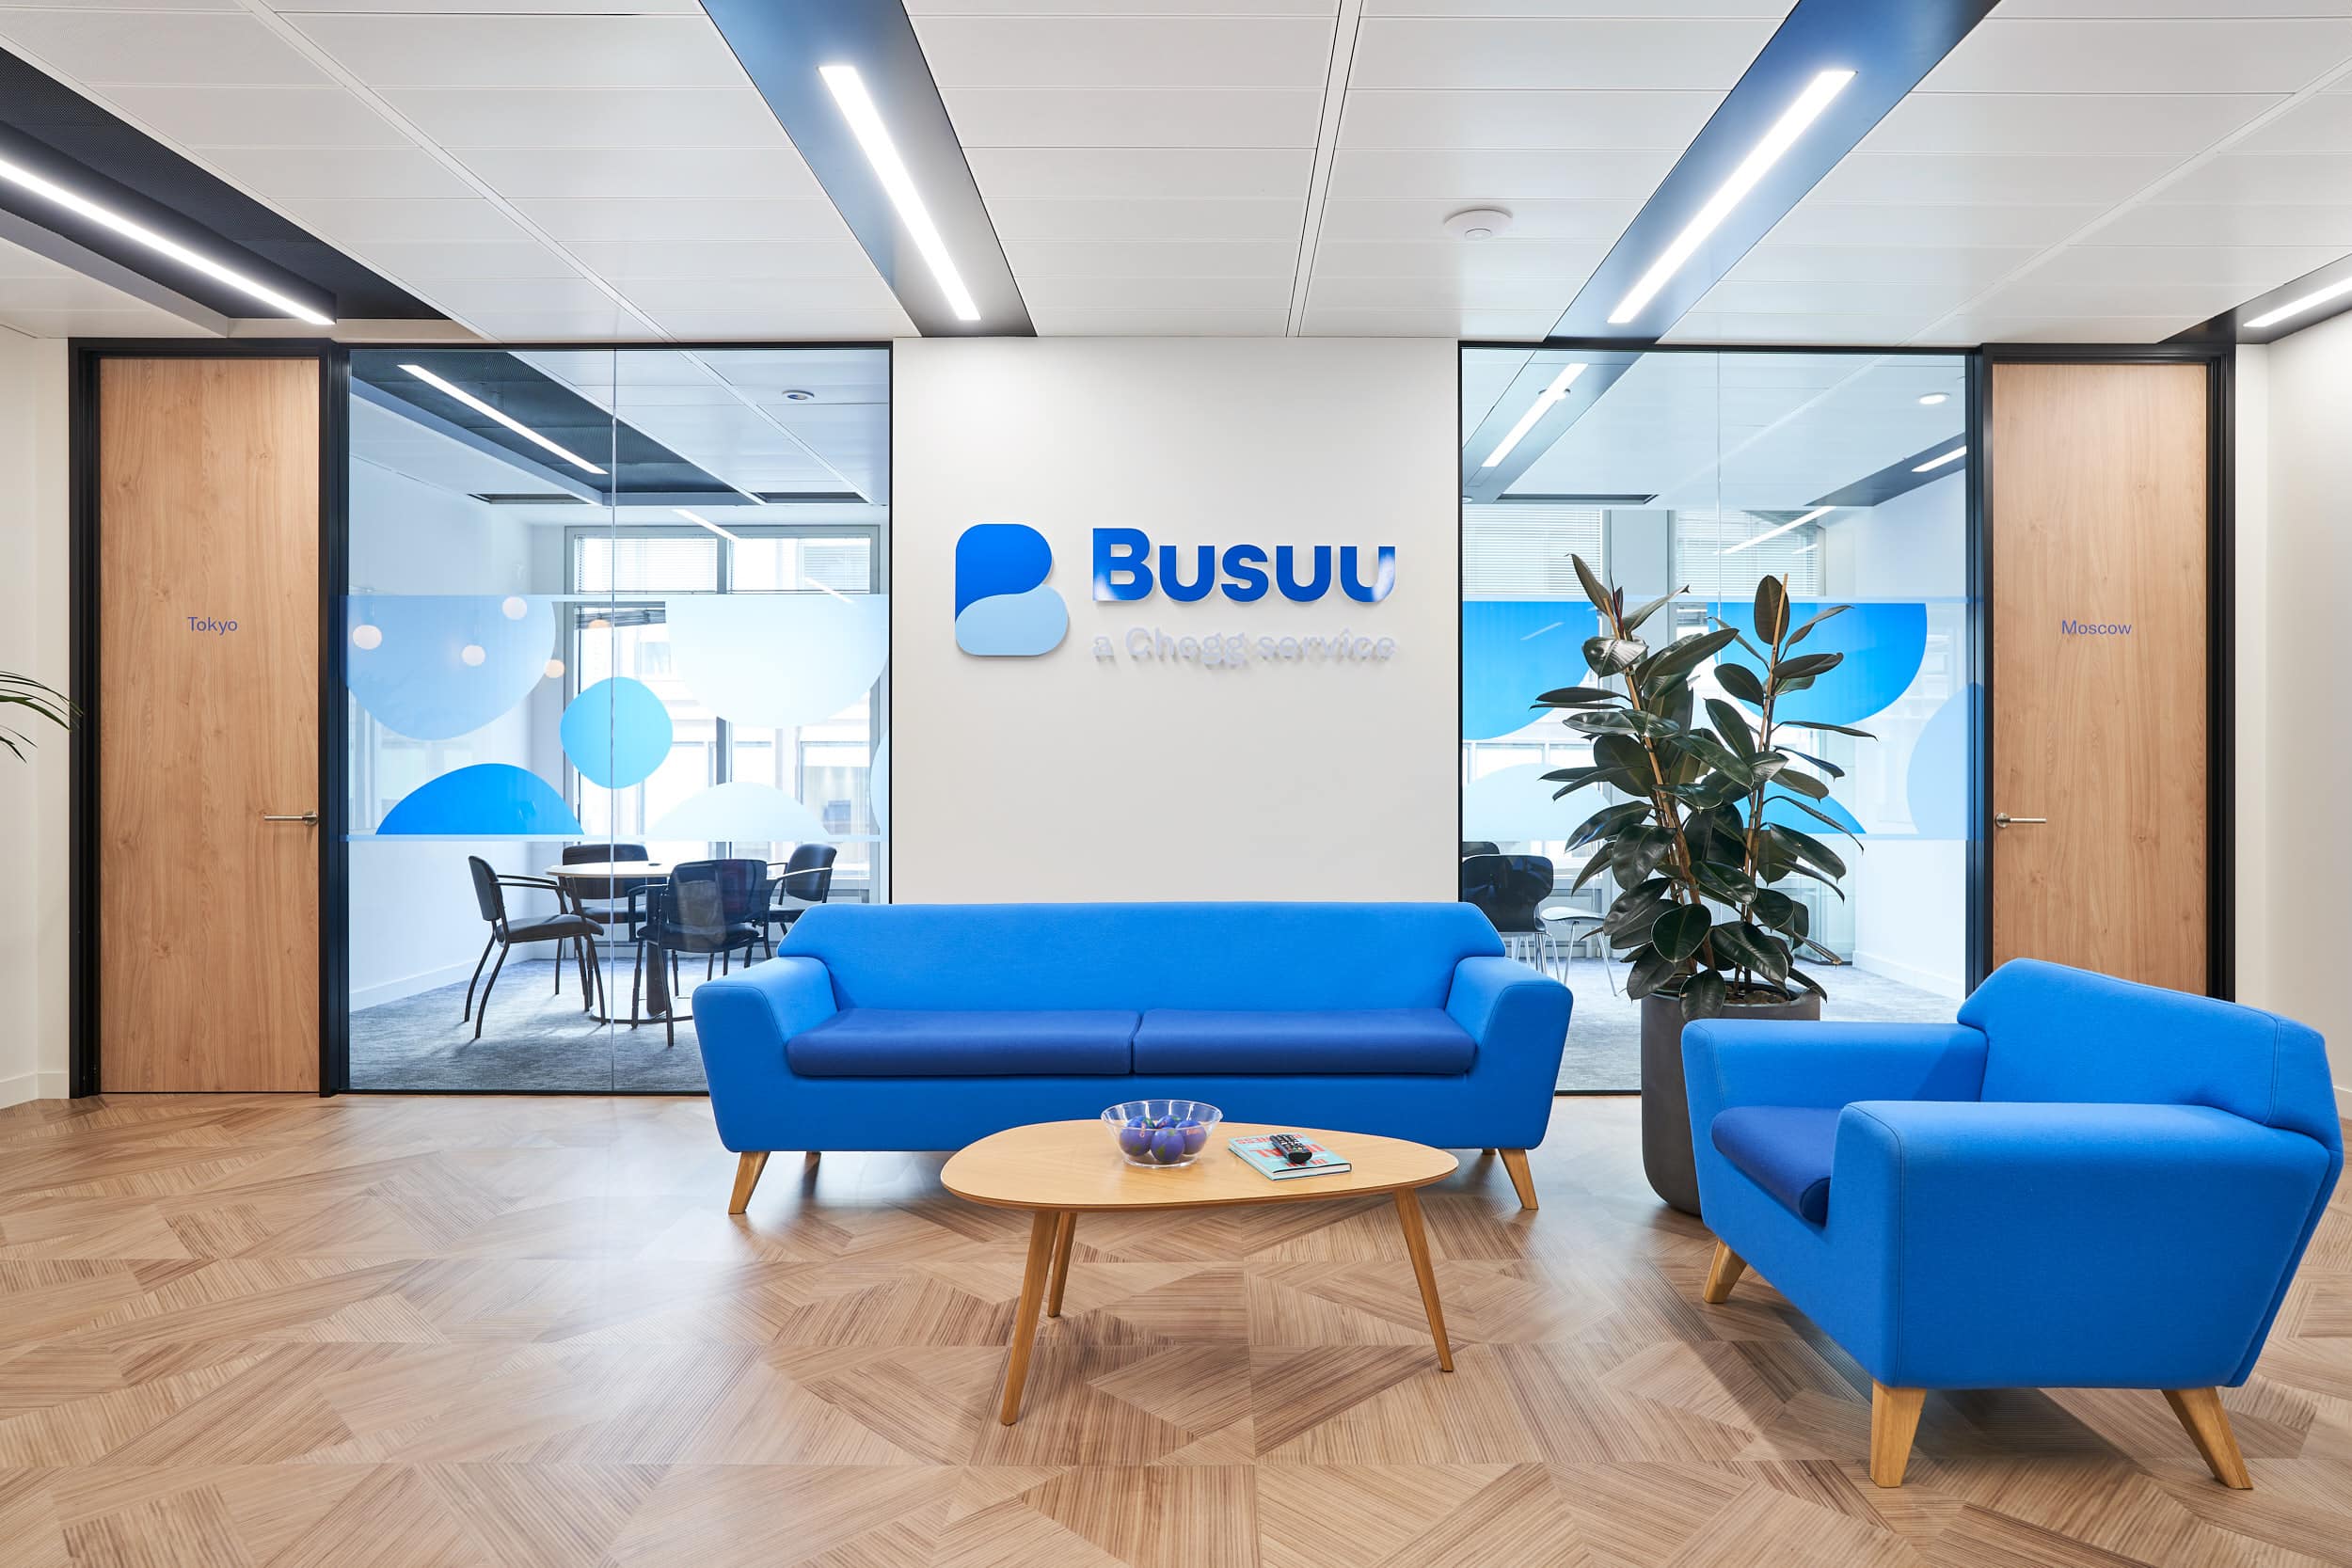 Busuu office design and build by AIS. Reception area with blue sofas reflective of the Busuu corporate branding.